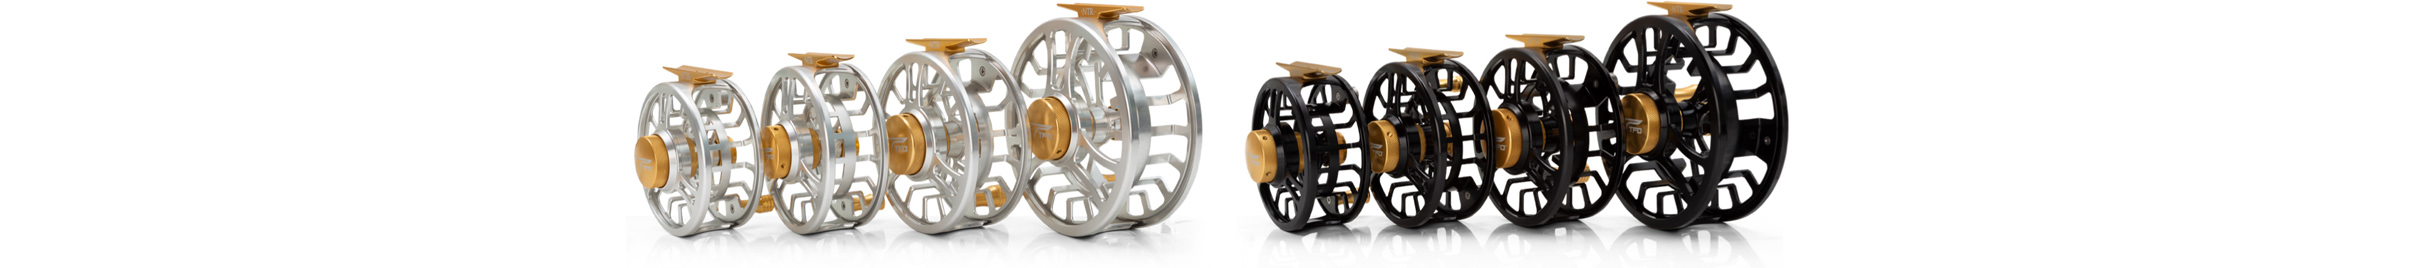 Temple Fork Outfitters NTR Fly Reel TheFlyStop